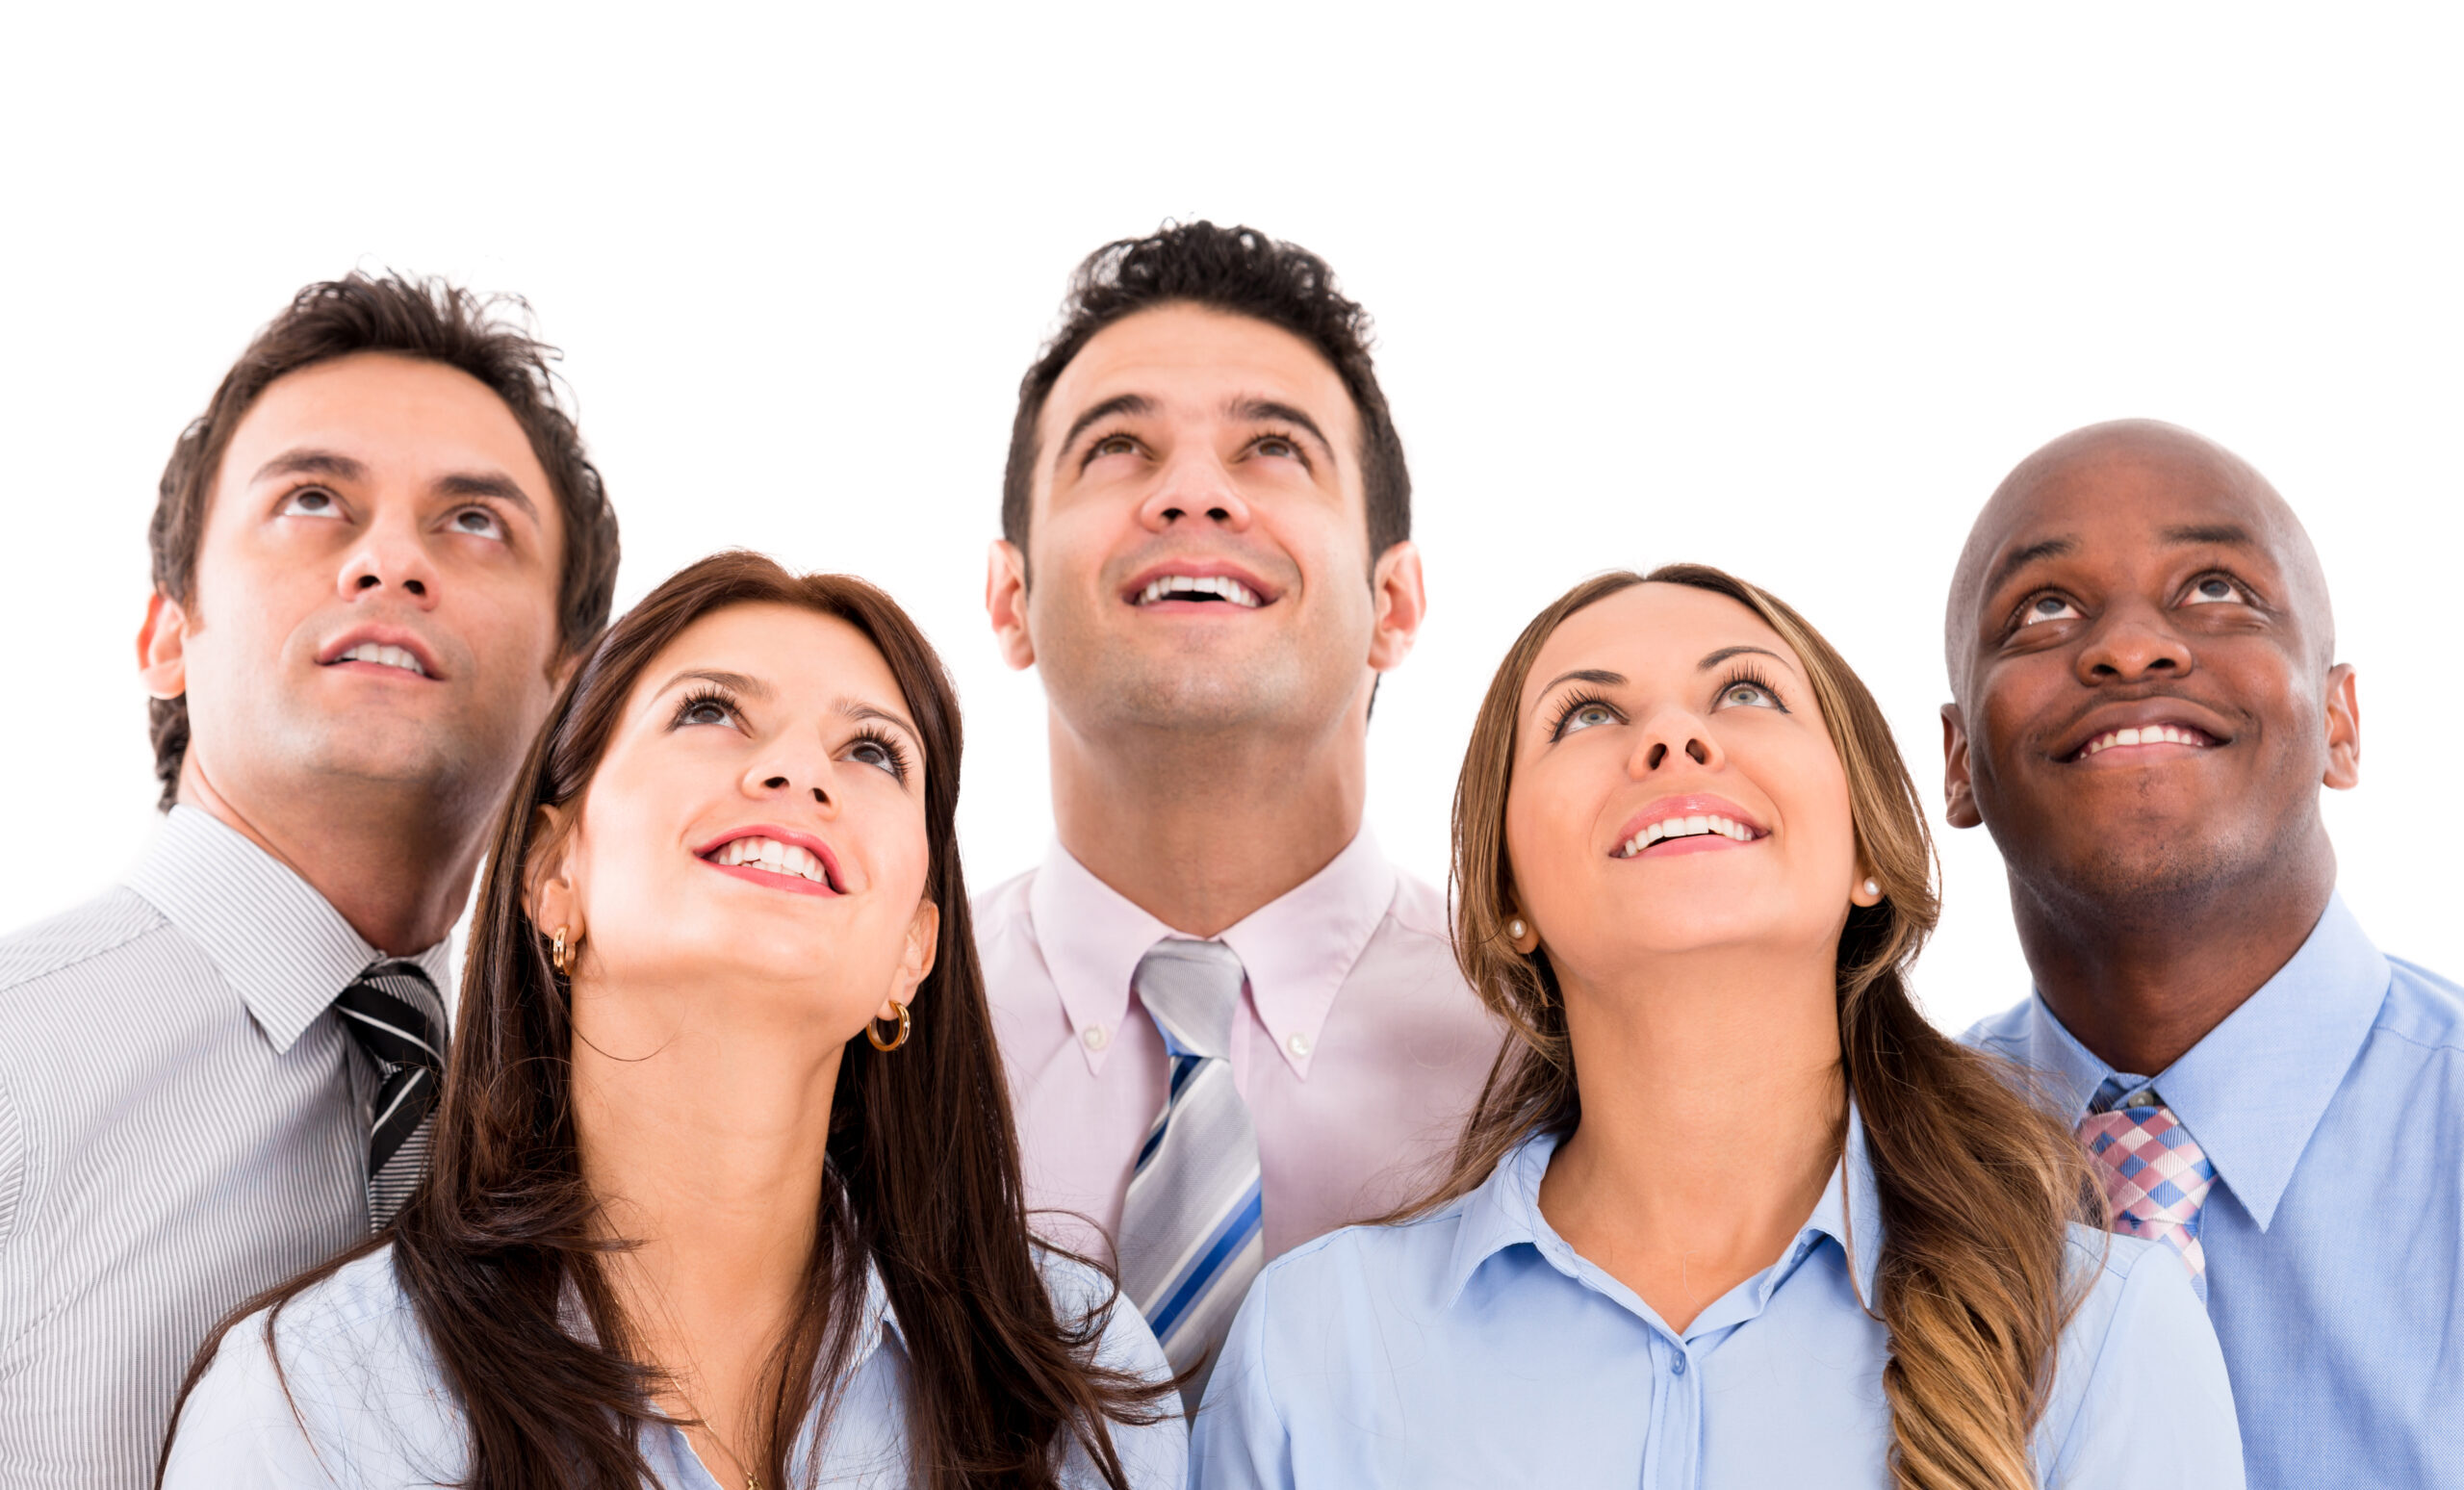 Business team looking up and smiling - isolated over White